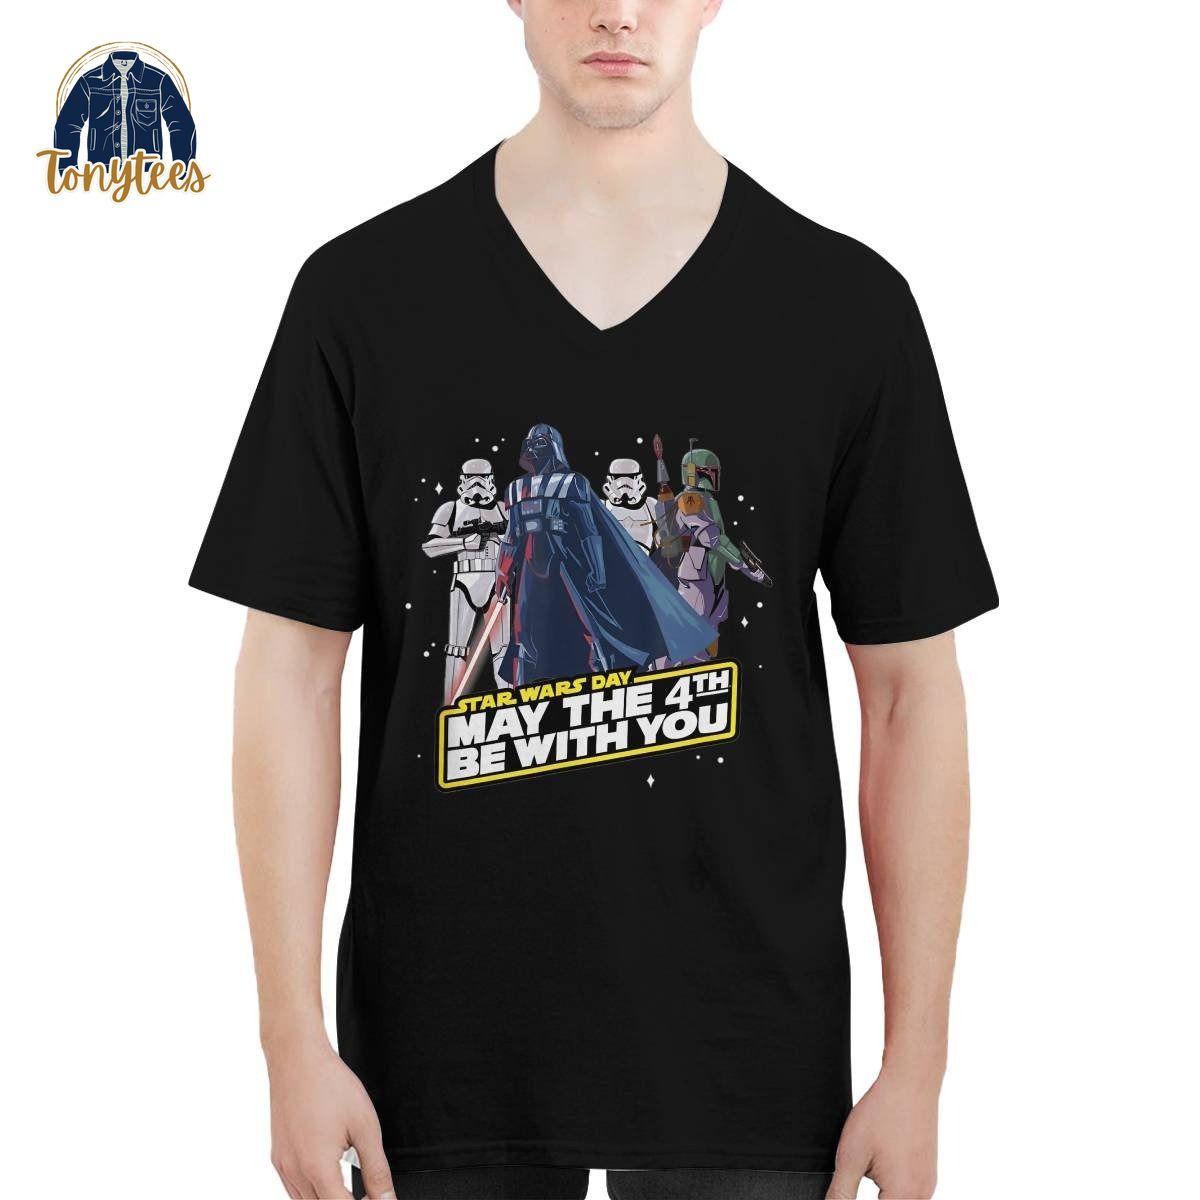 Star Wars day May the 4th be with you shirt